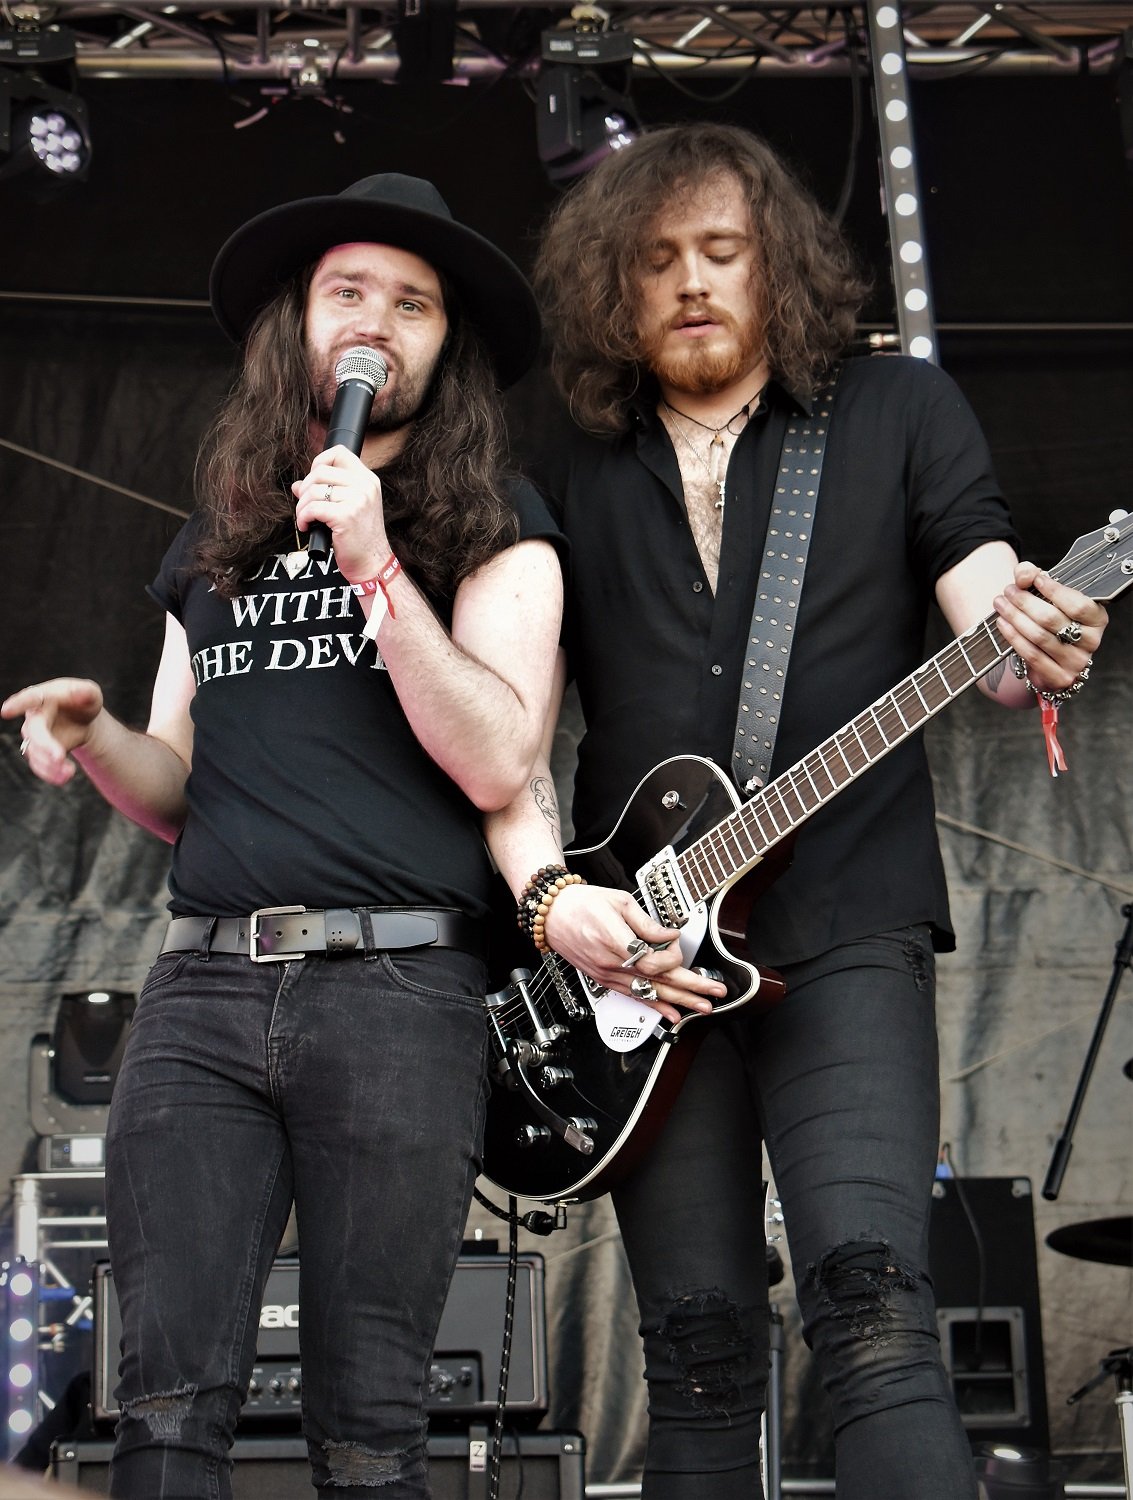 Revival Black at the Call of the Wild Festival 2022